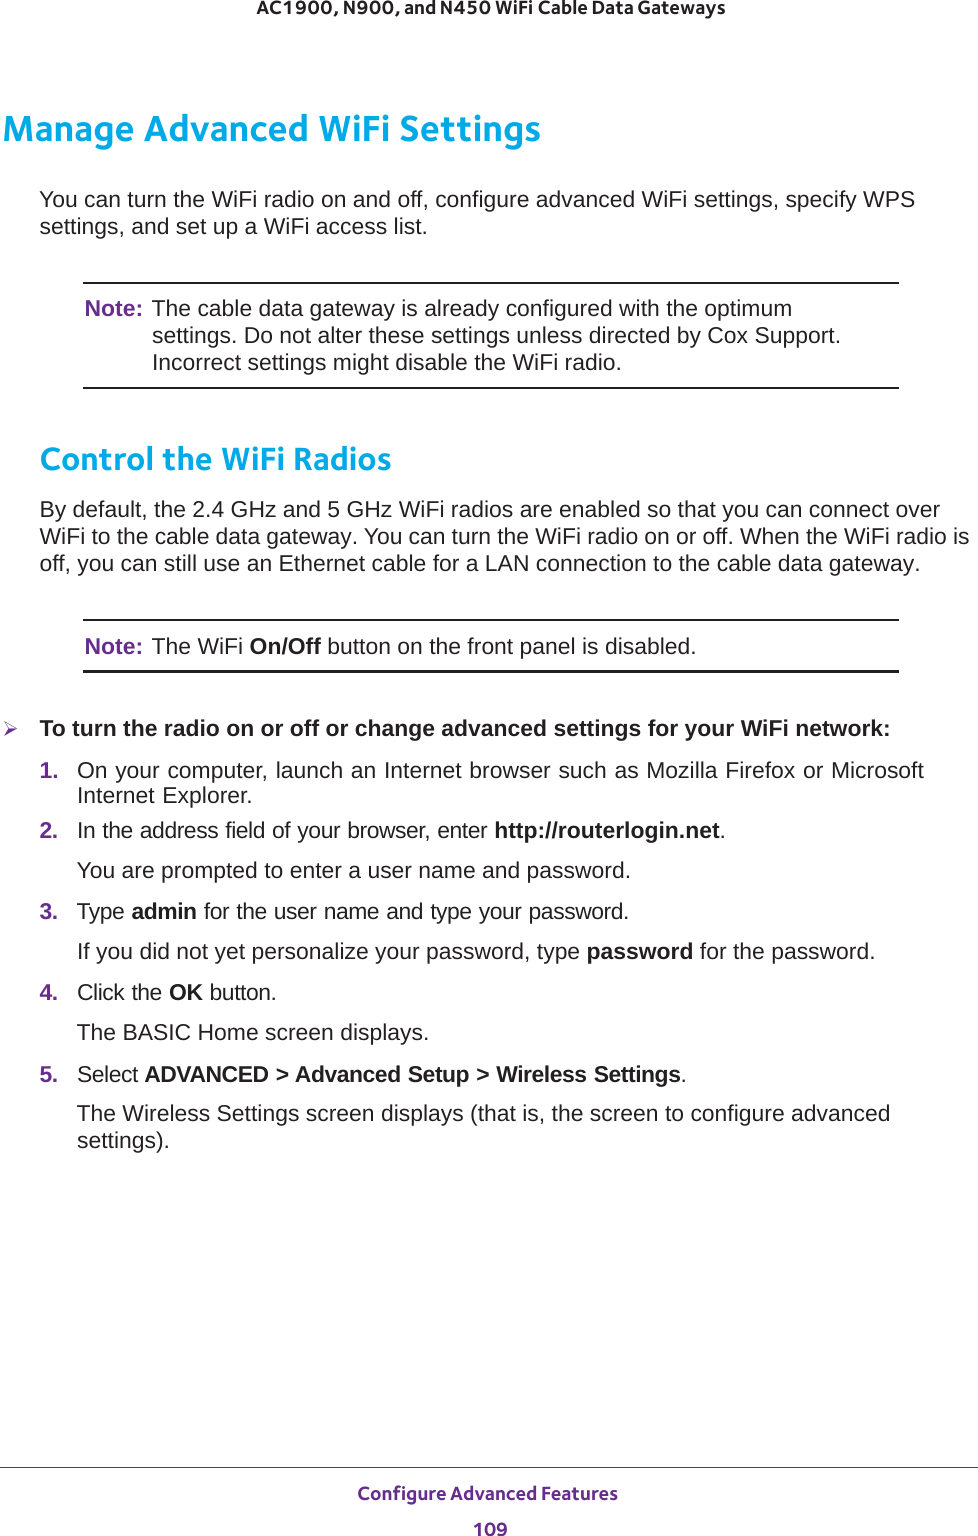 Configure Advanced Features 109 AC1900, N900, and N450 WiFi Cable Data GatewaysManage Advanced WiFi SettingsYou can turn the WiFi radio on and off, configure advanced WiFi settings, specify WPS settings, and set up a WiFi access list.Note: The cable data gateway is already configured with the optimum settings. Do not alter these settings unless directed by Cox Support. Incorrect settings might disable the WiFi radio.Control the WiFi RadiosBy default, the 2.4 GHz and 5 GHz WiFi radios are enabled so that you can connect over WiFi to the cable data gateway. You can turn the WiFi radio on or off. When the WiFi radio is off, you can still use an Ethernet cable for a LAN connection to the cable data gateway.Note: The WiFi On/Off button on the front panel is disabled.To turn the radio on or off or change advanced settings for your WiFi network:1.  On your computer, launch an Internet browser such as Mozilla Firefox or Microsoft Internet Explorer. 2.  In the address field of your browser, enter http://routerlogin.net.You are prompted to enter a user name and password.3.  Type admin for the user name and type your password.If you did not yet personalize your password, type password for the password.4.  Click the OK button. The BASIC Home screen displays.5.  Select ADVANCED &gt; Advanced Setup &gt; Wireless Settings.The Wireless Settings screen displays (that is, the screen to configure advanced settings).